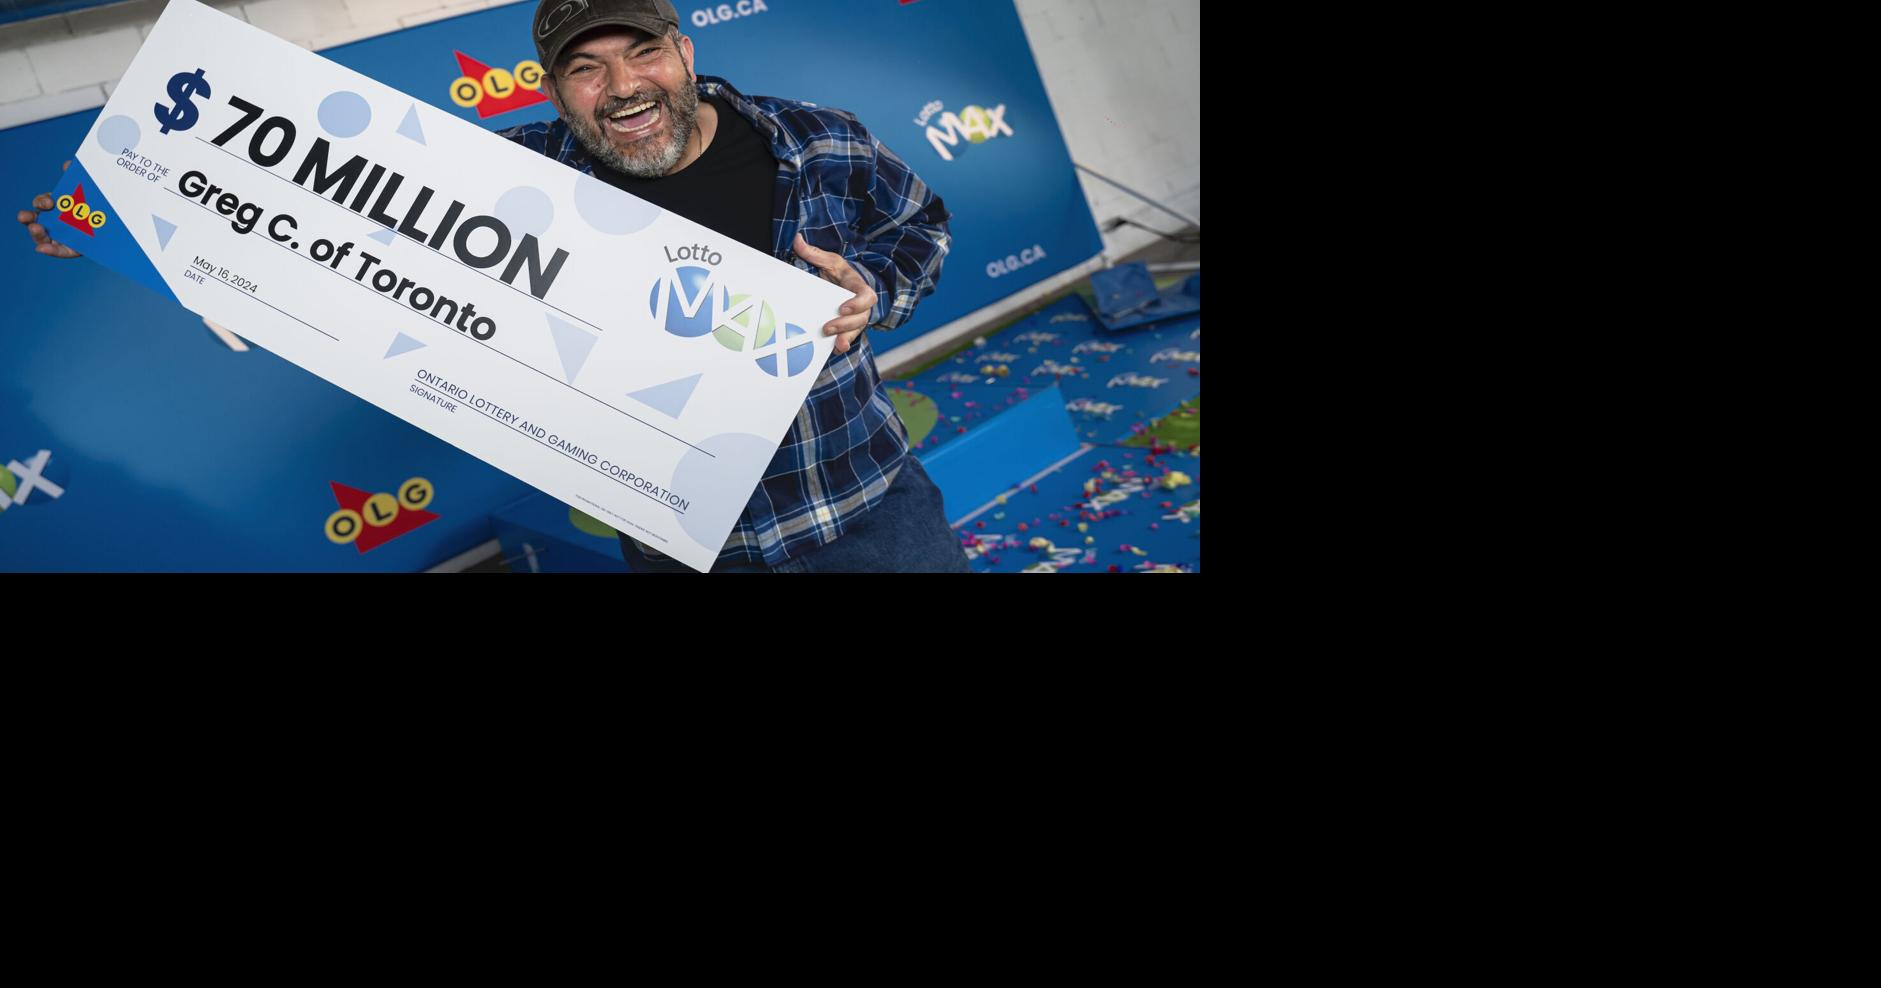 ‘Massive lottery win’: Ontario man wins -million Lotto Max prize after buying ticket while grocery shopping